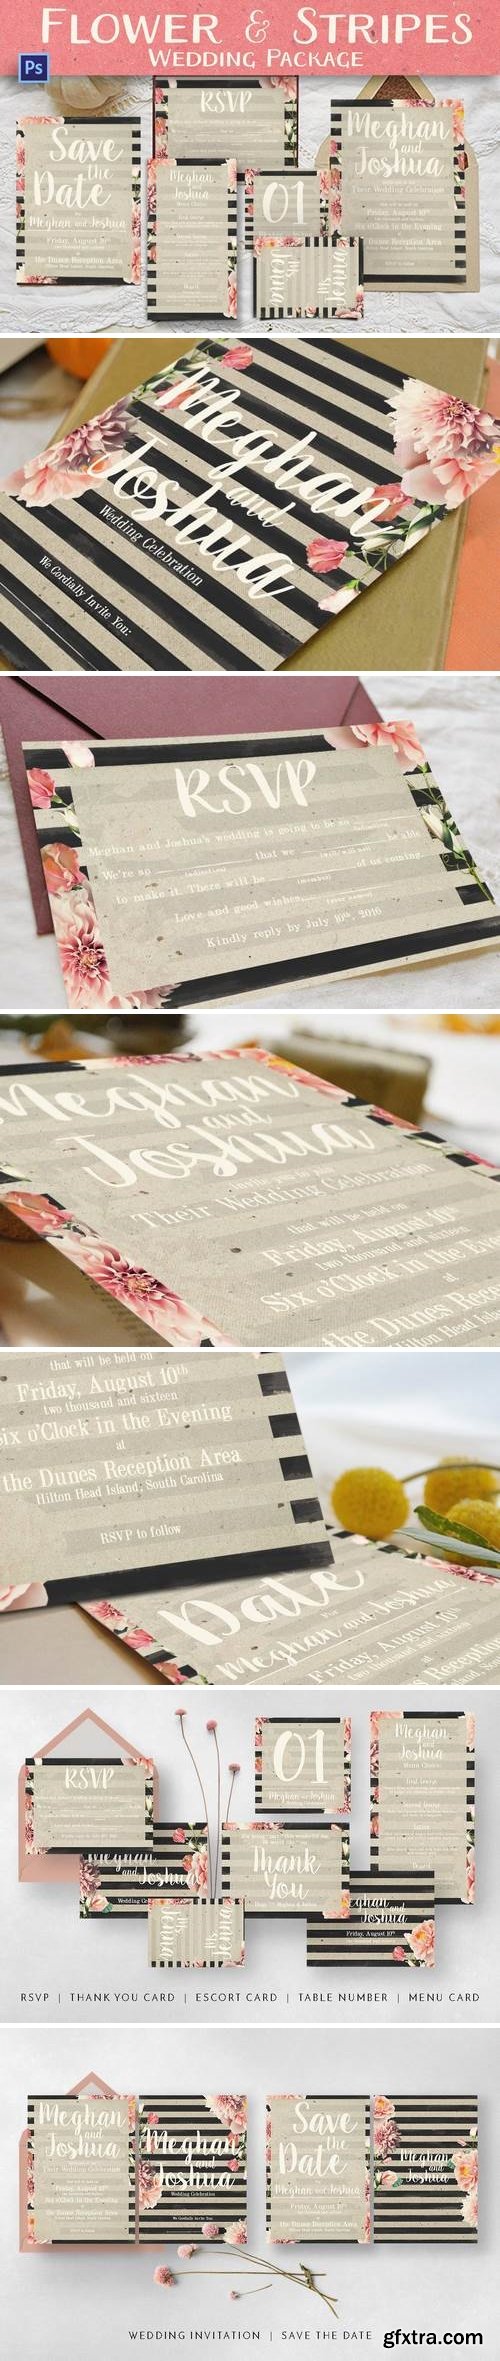 Flower And Stripes Wedding Package - 8JJ9PS